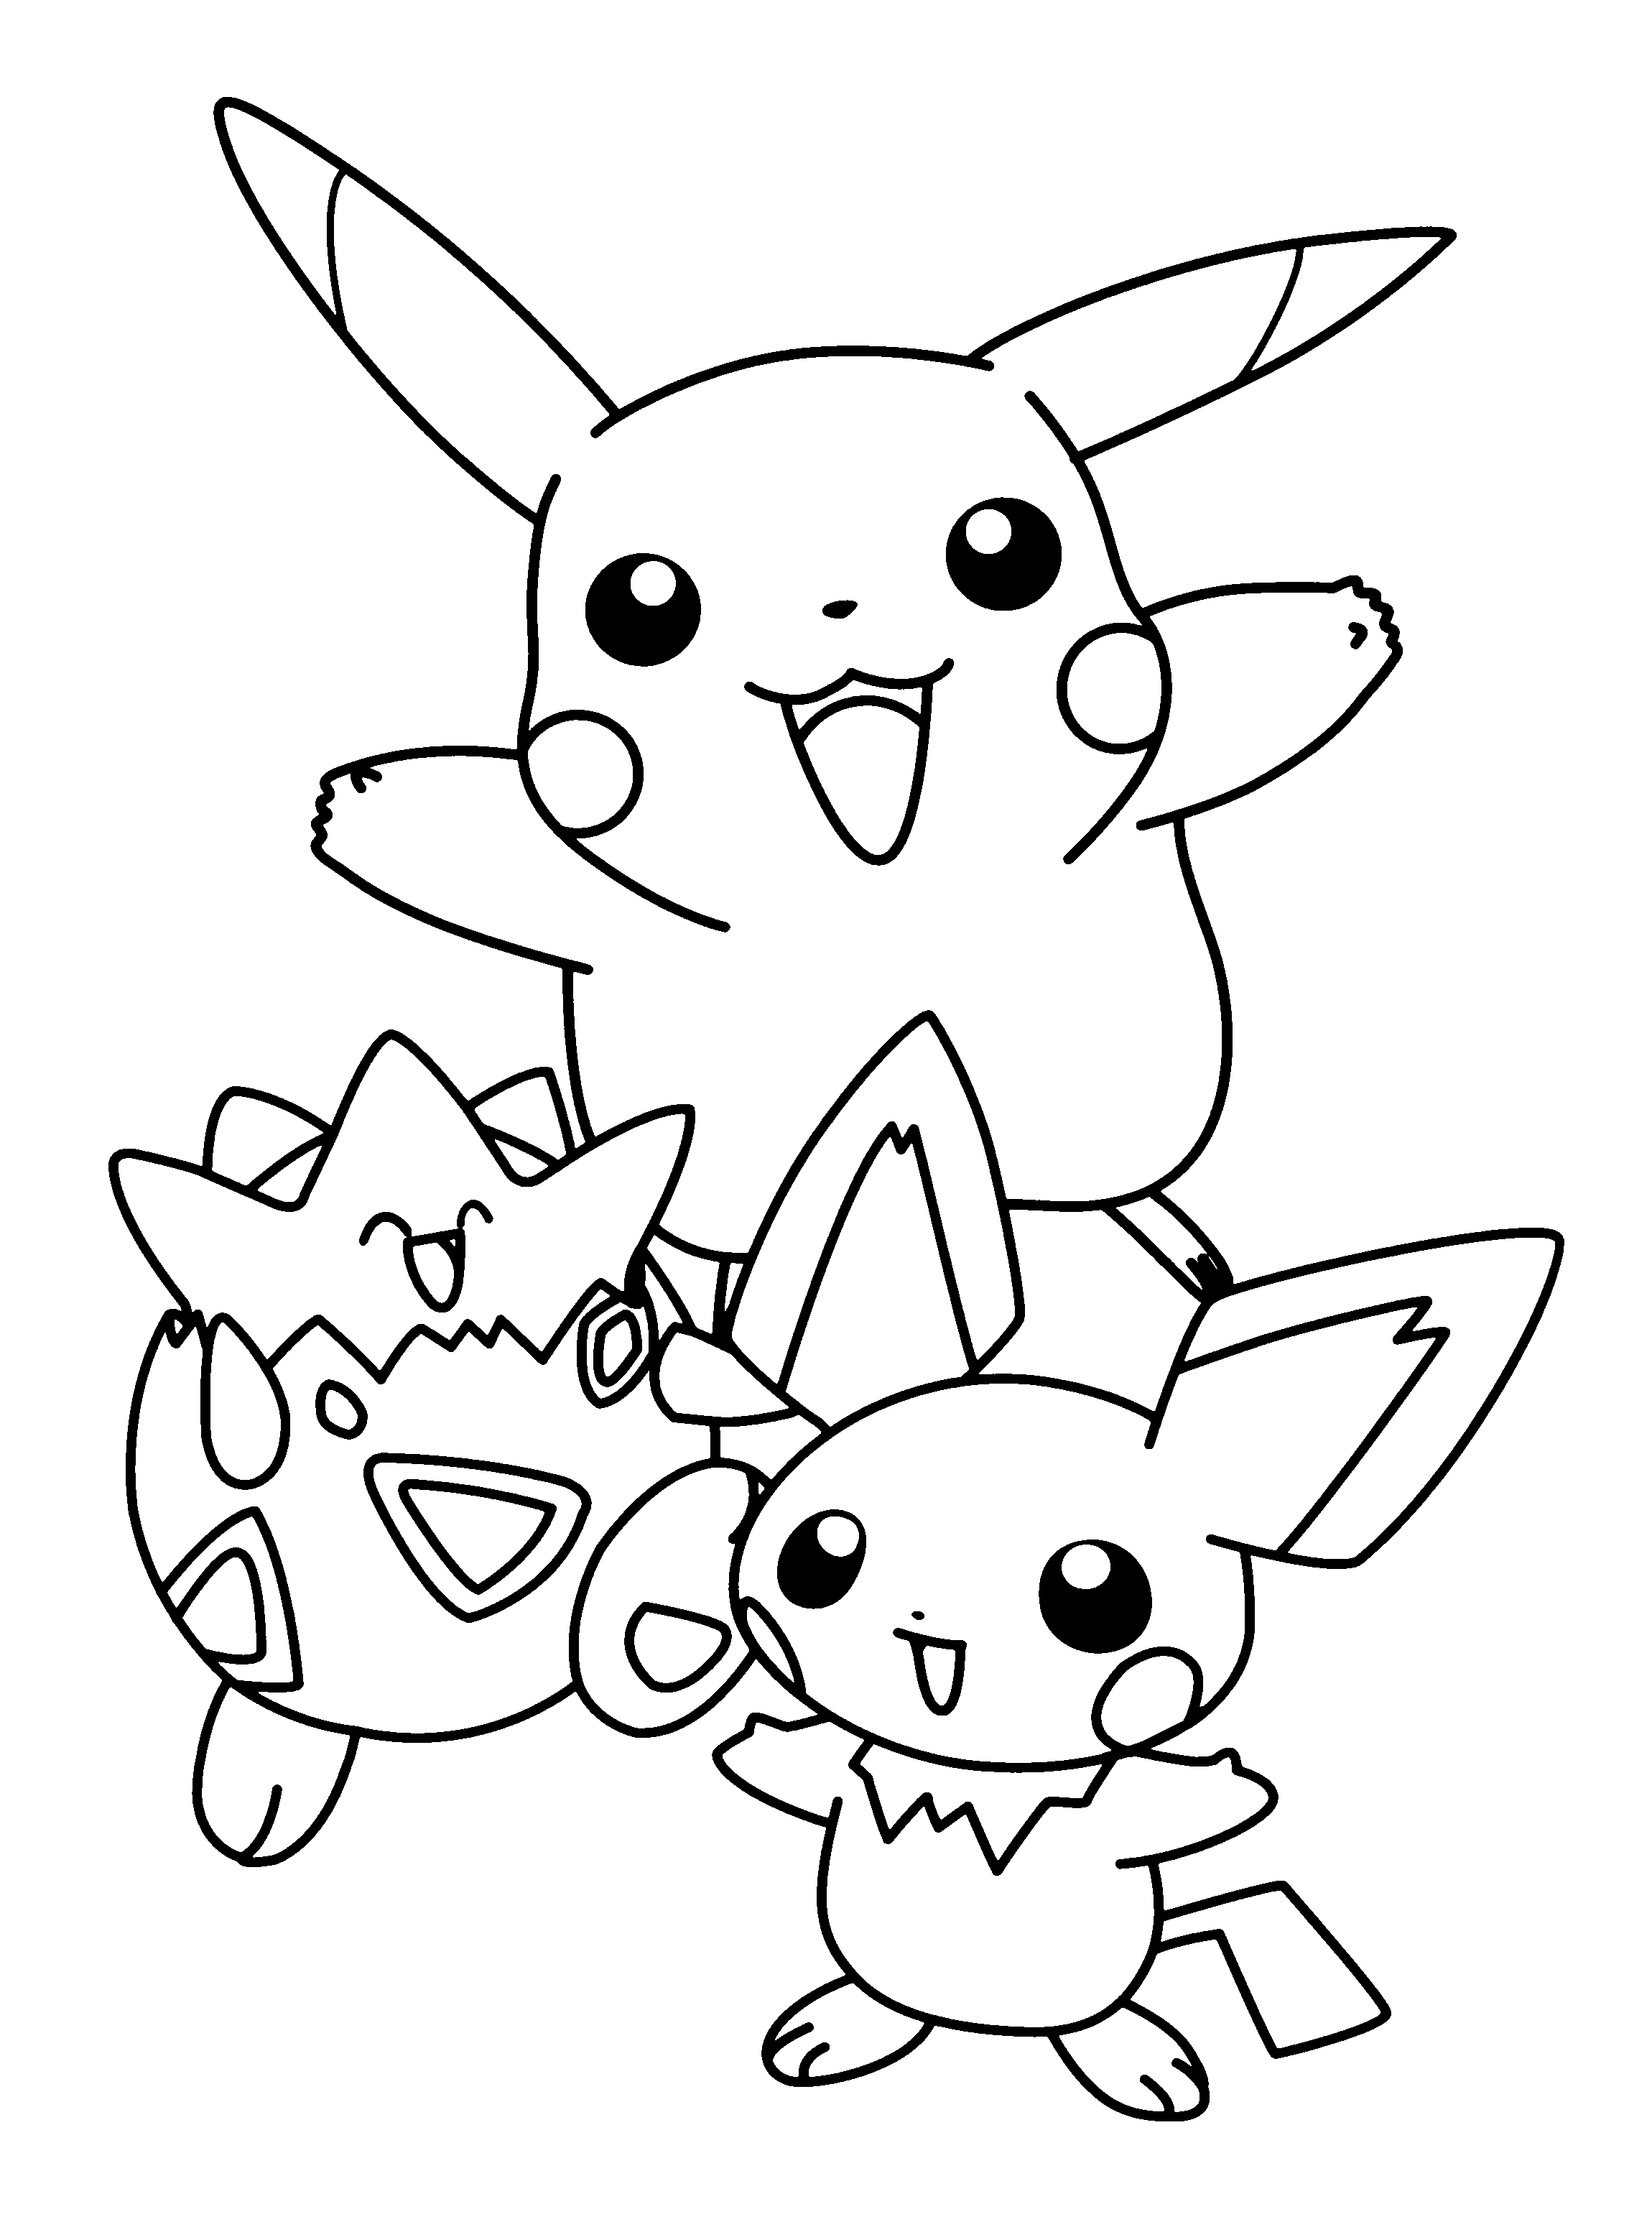 free pokemon coloring pages pokemon coloring pages join your favorite pokemon on an pages pokemon coloring free 